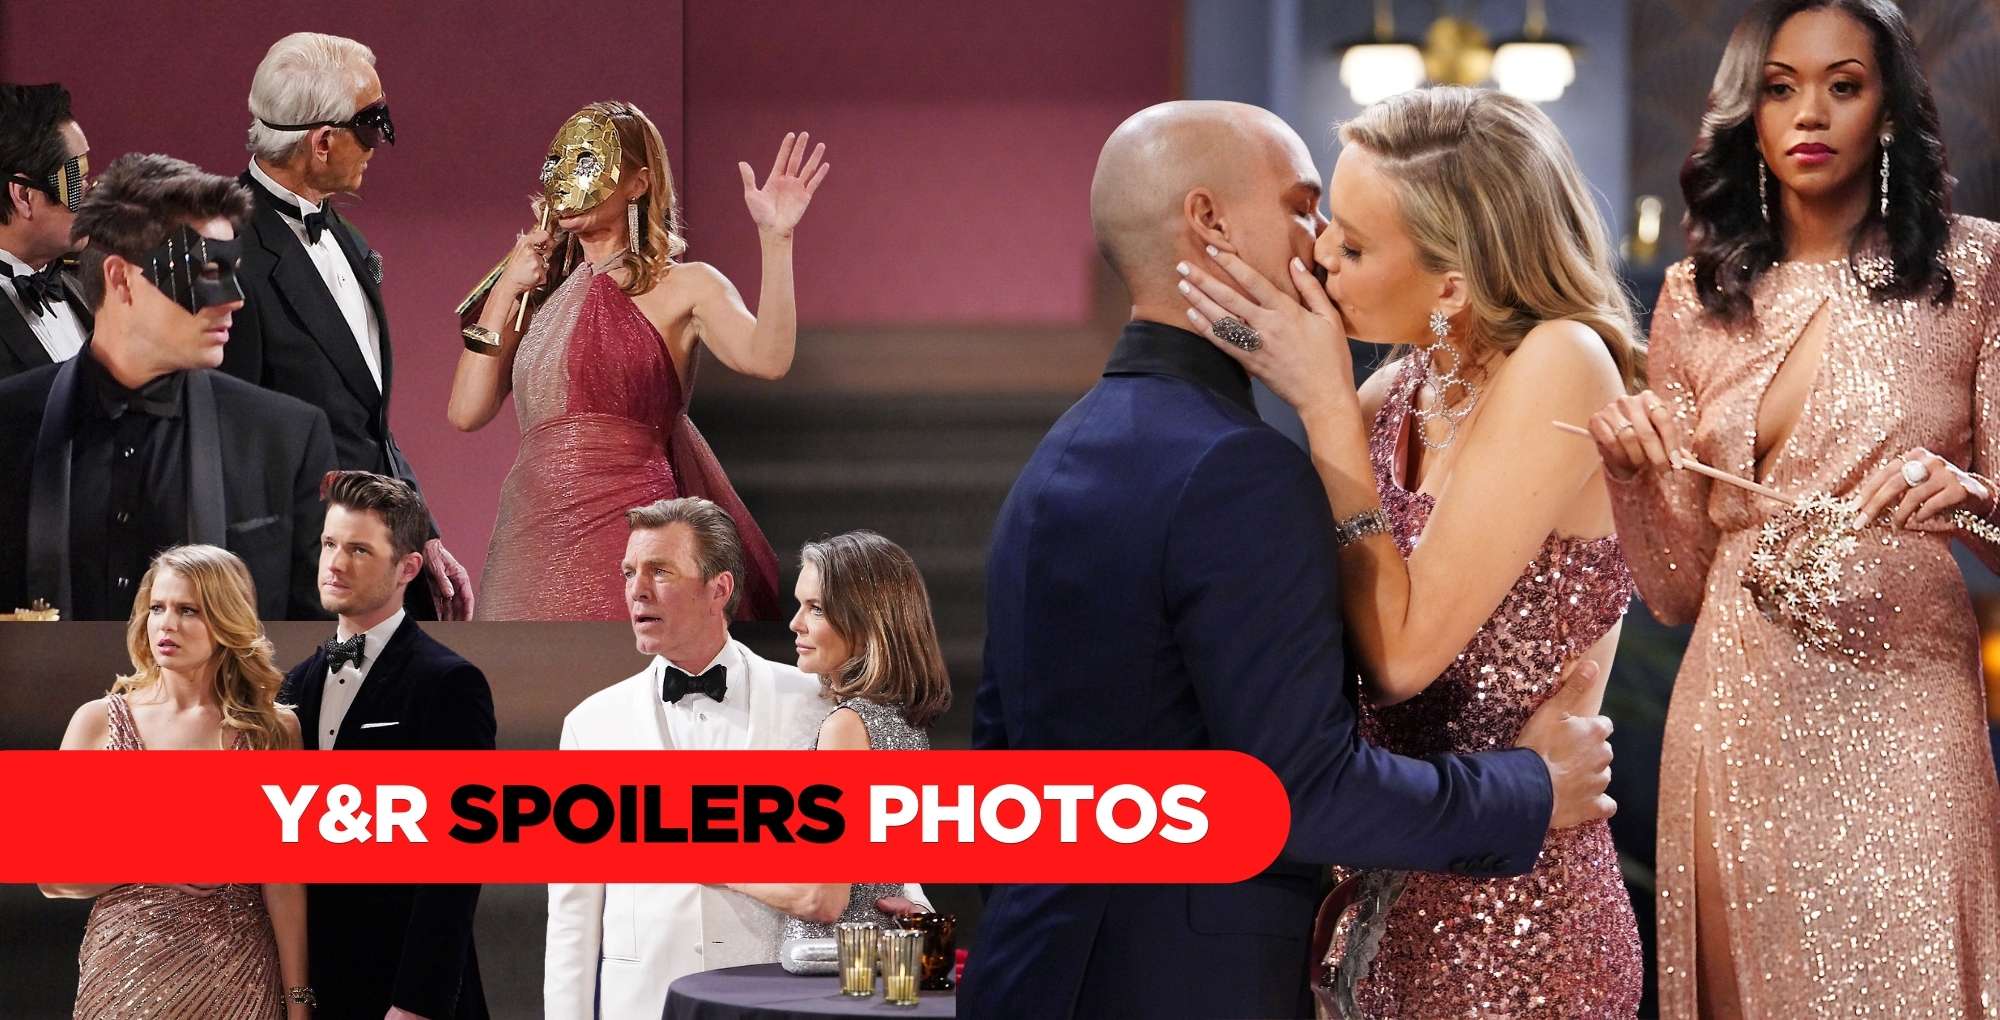 y&r spoilers photos for march 30.